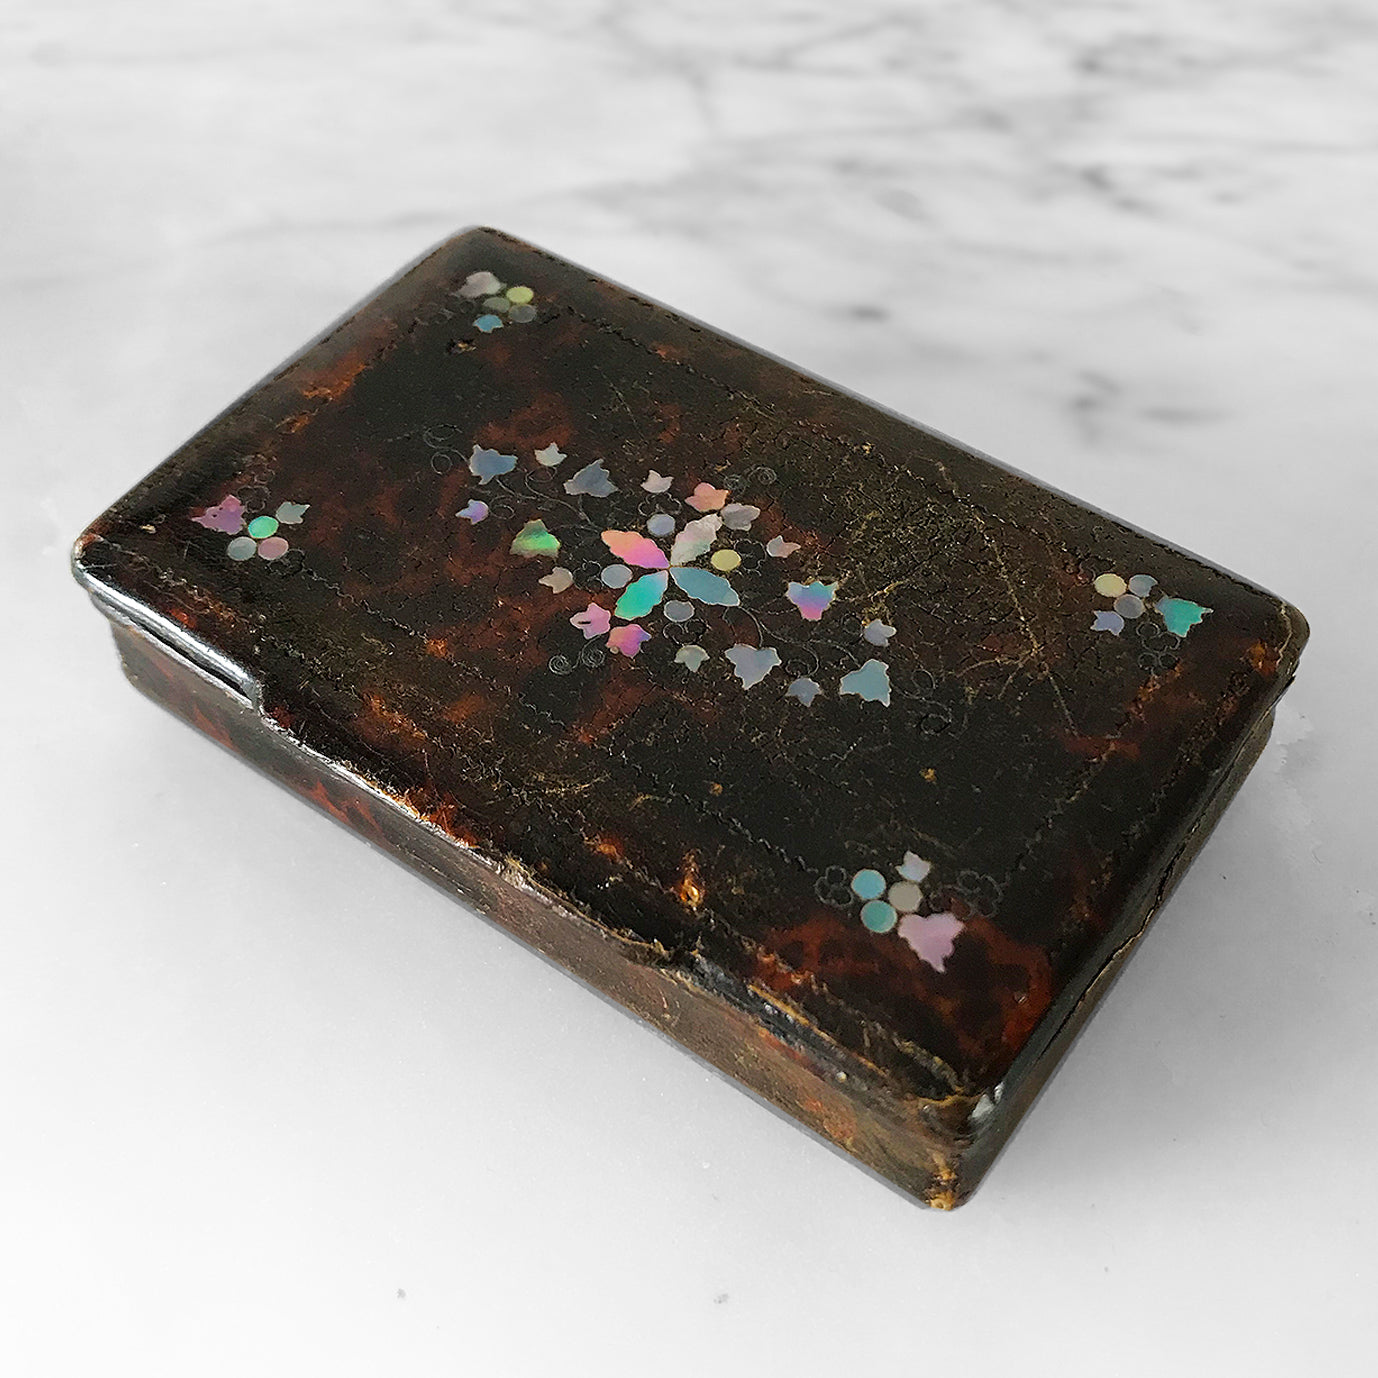 Charming little Papier Mache Snuff Box with Mother of Pearl inlay - SHOP NOW - www.intovintage.co.uk